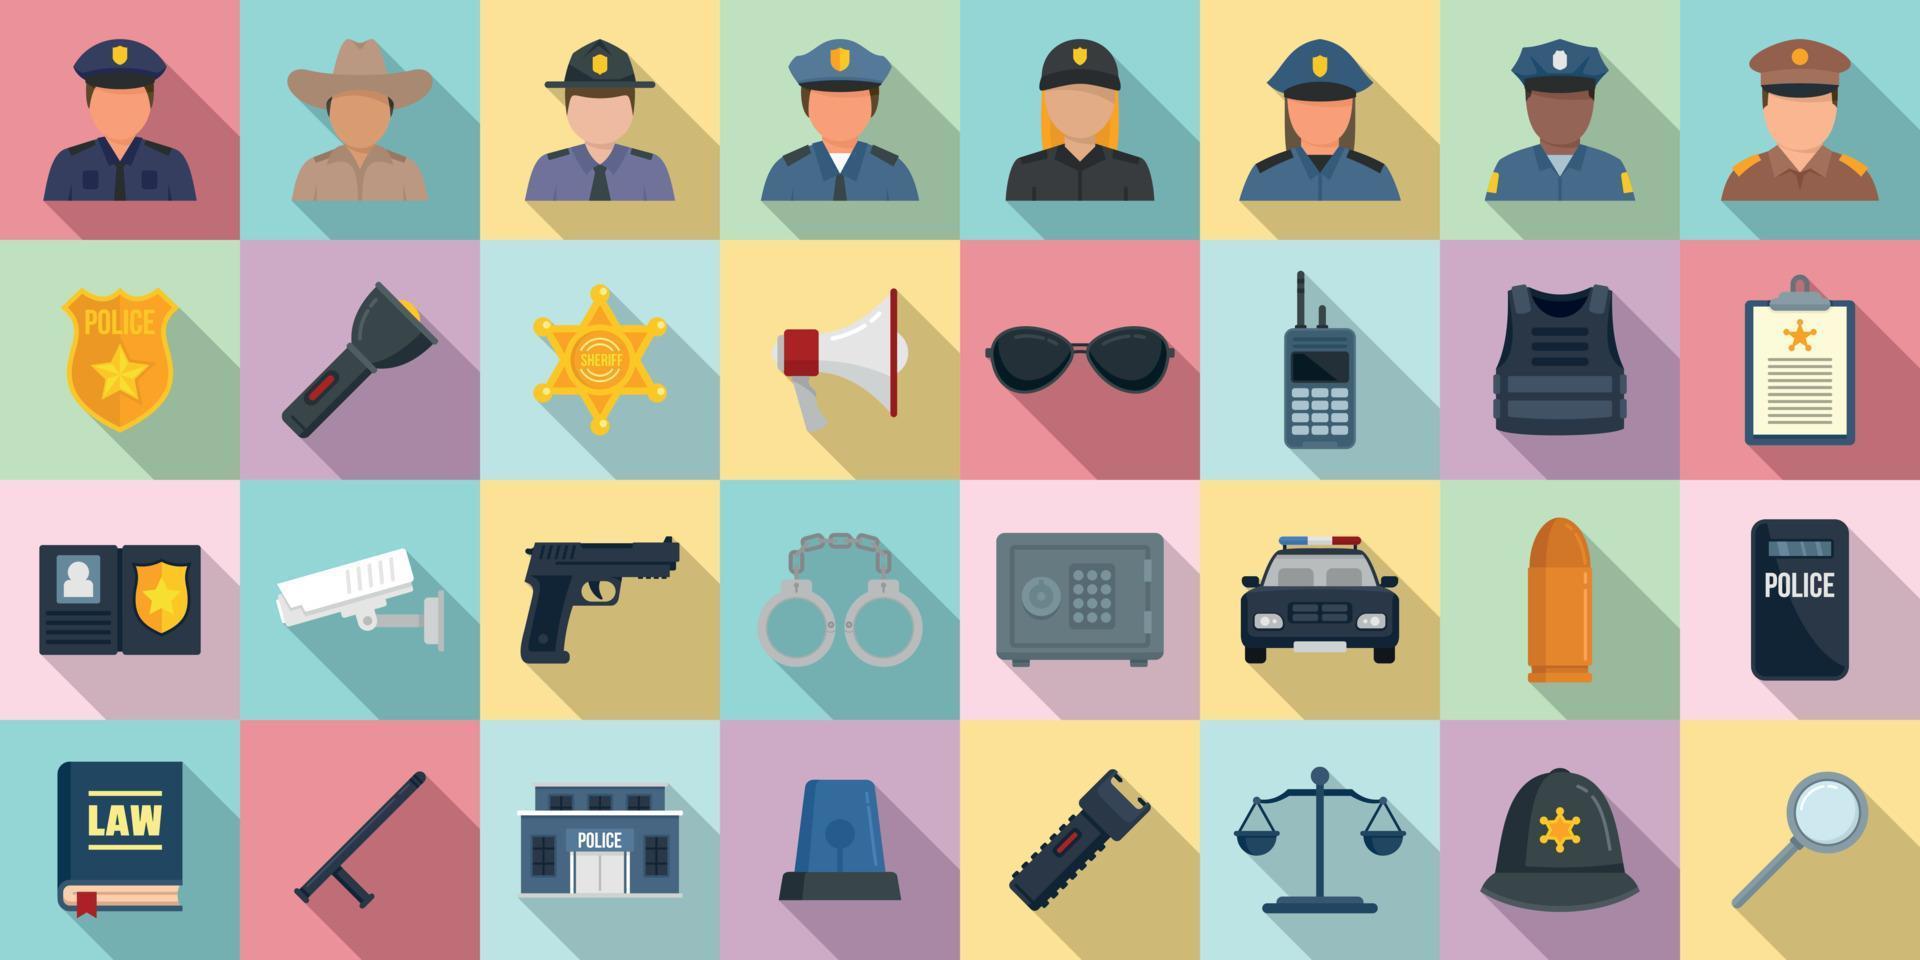 Policeman icons set, flat style vector